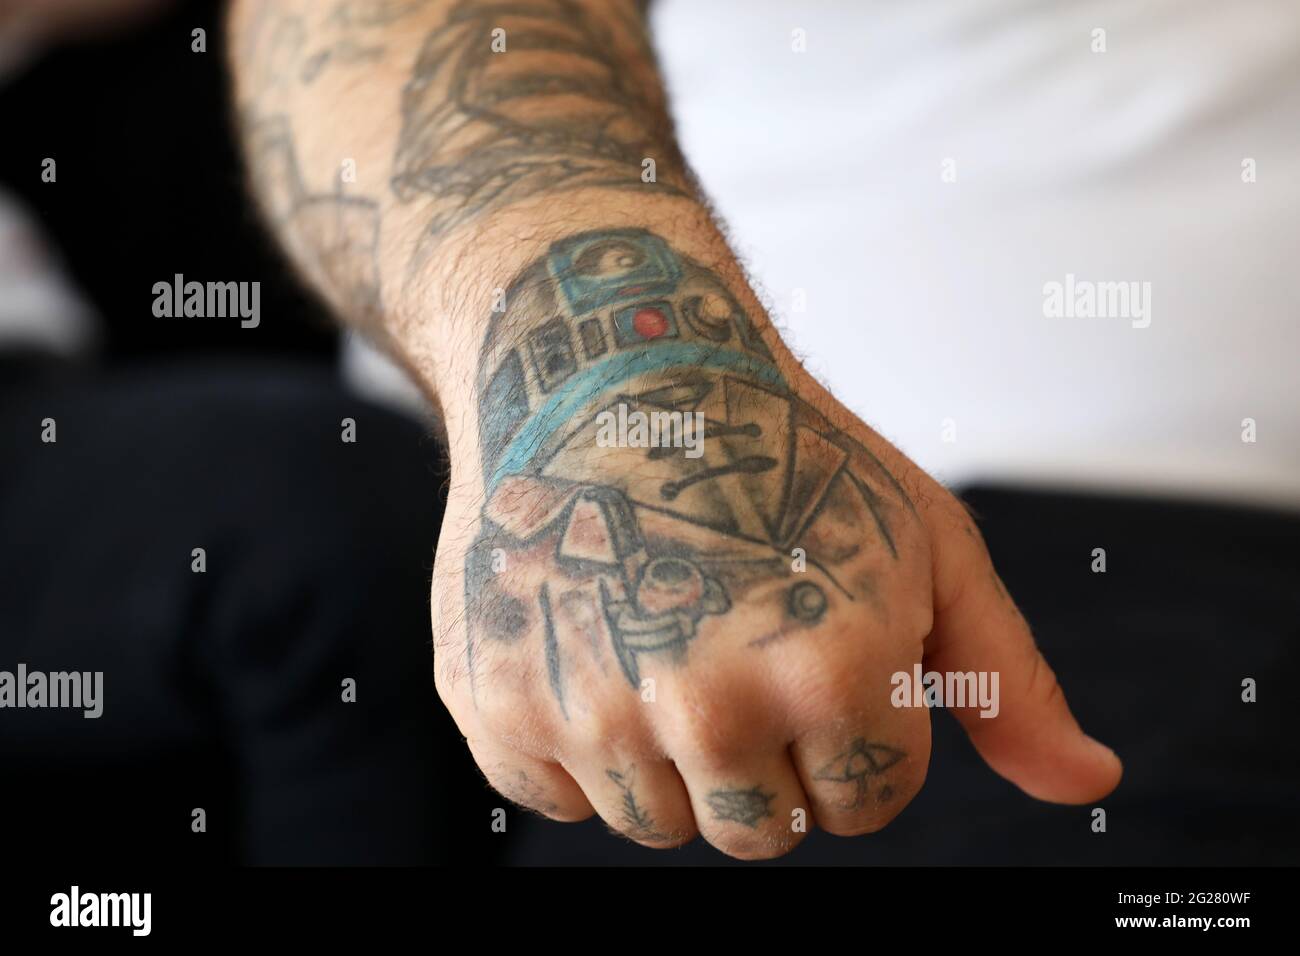 Tattoos of an English rose, Mr Bean, Del Boy and R2-D2 pictured on a mans arm in Portsmouth, Hampshire, UK. Stock Photo